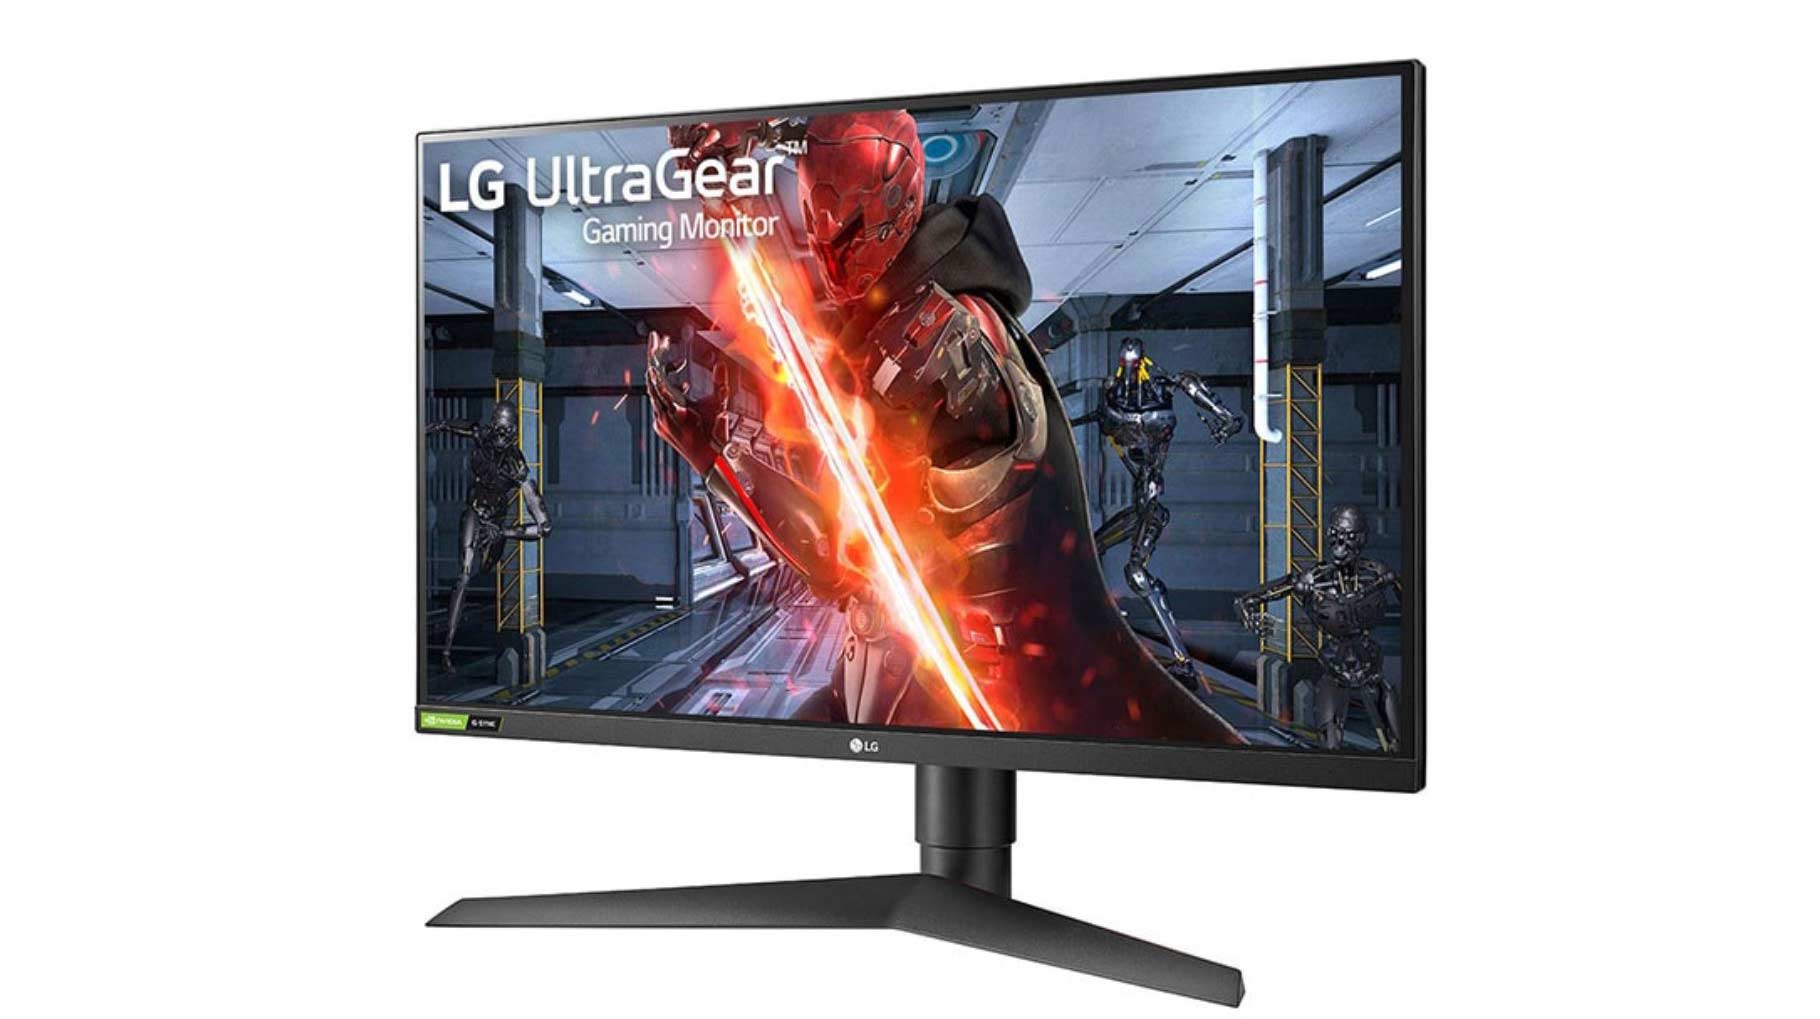 LG launches a variety of new monitors for gamers